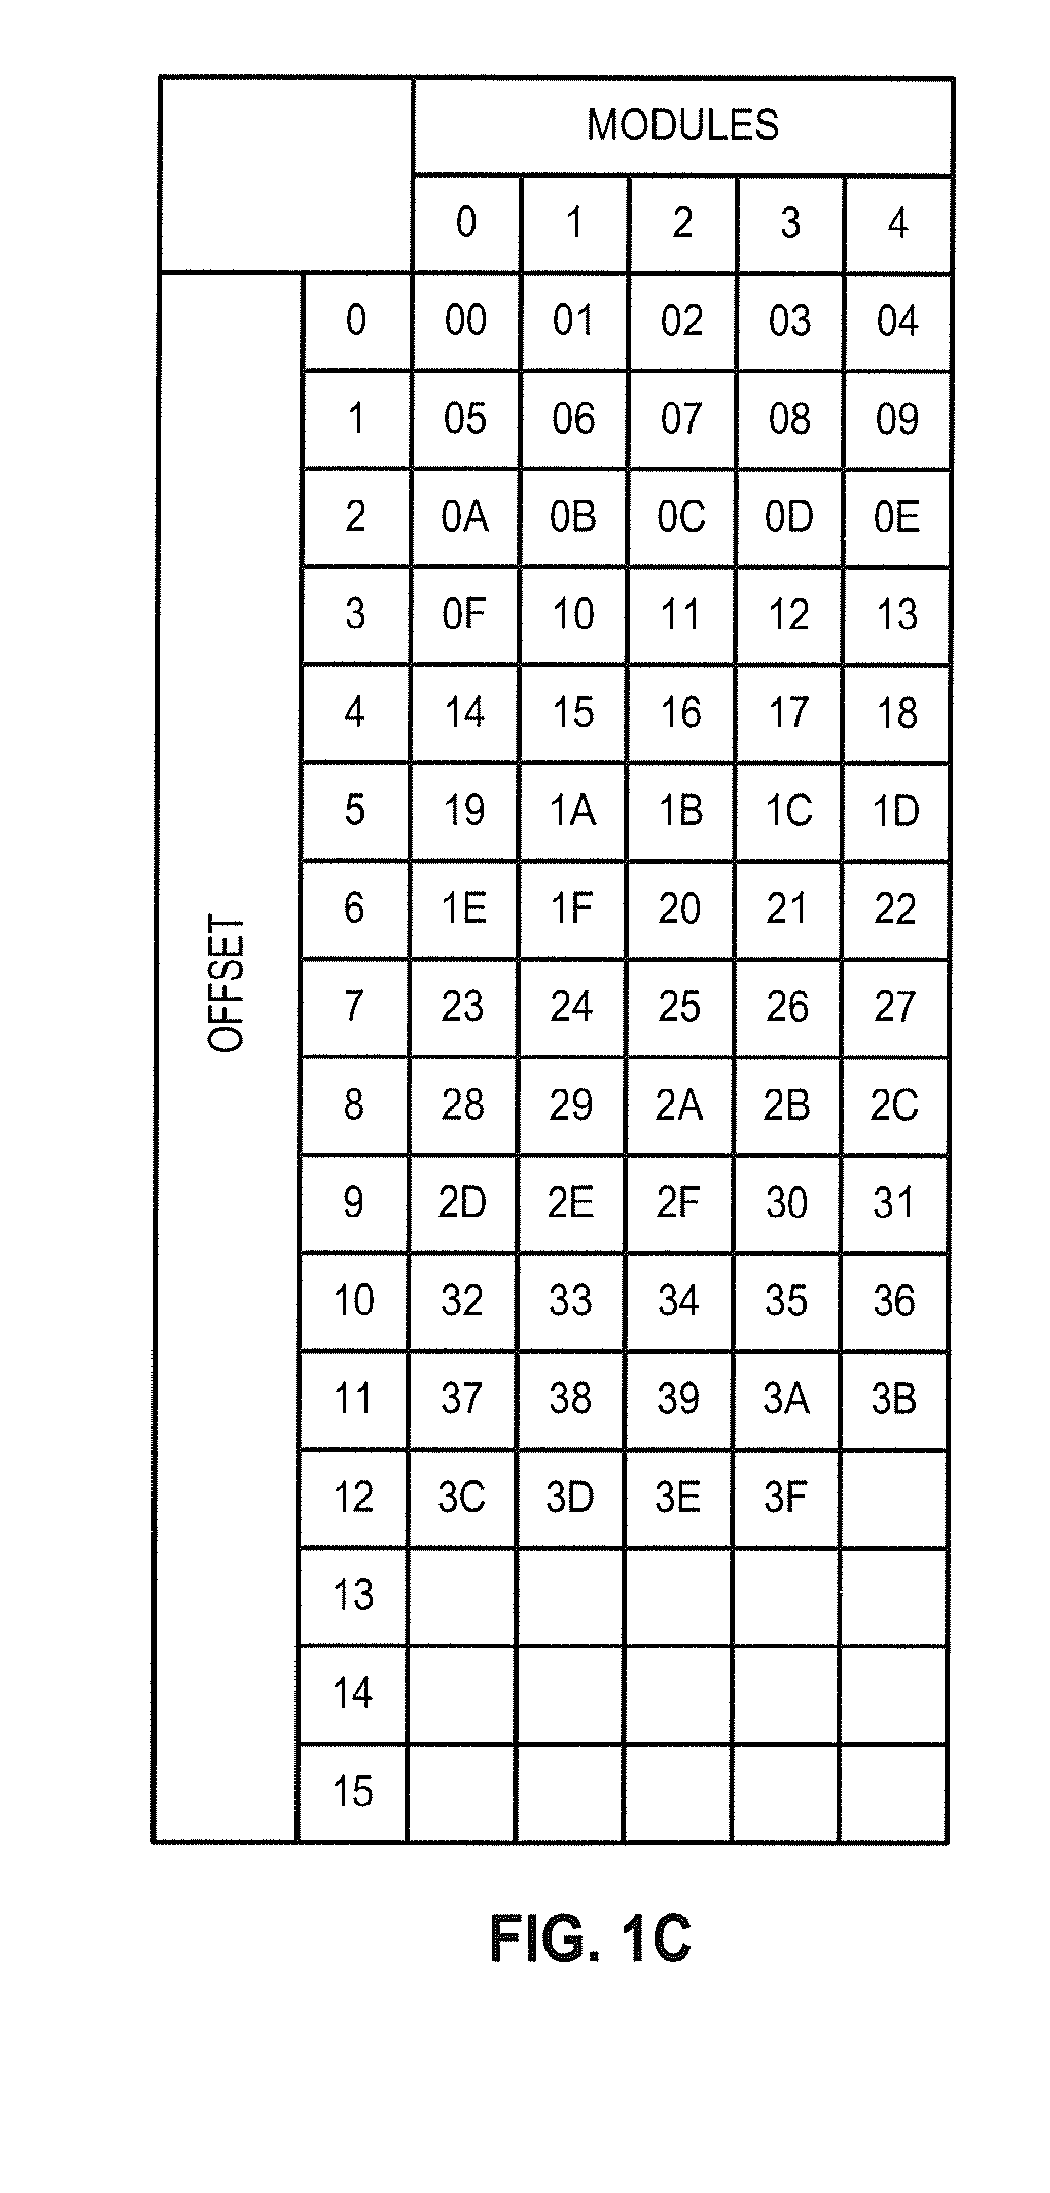 FAST MECHANISM FOR ACCESSING 2n±1 INTERLEAVED MEMORY SYSTEM